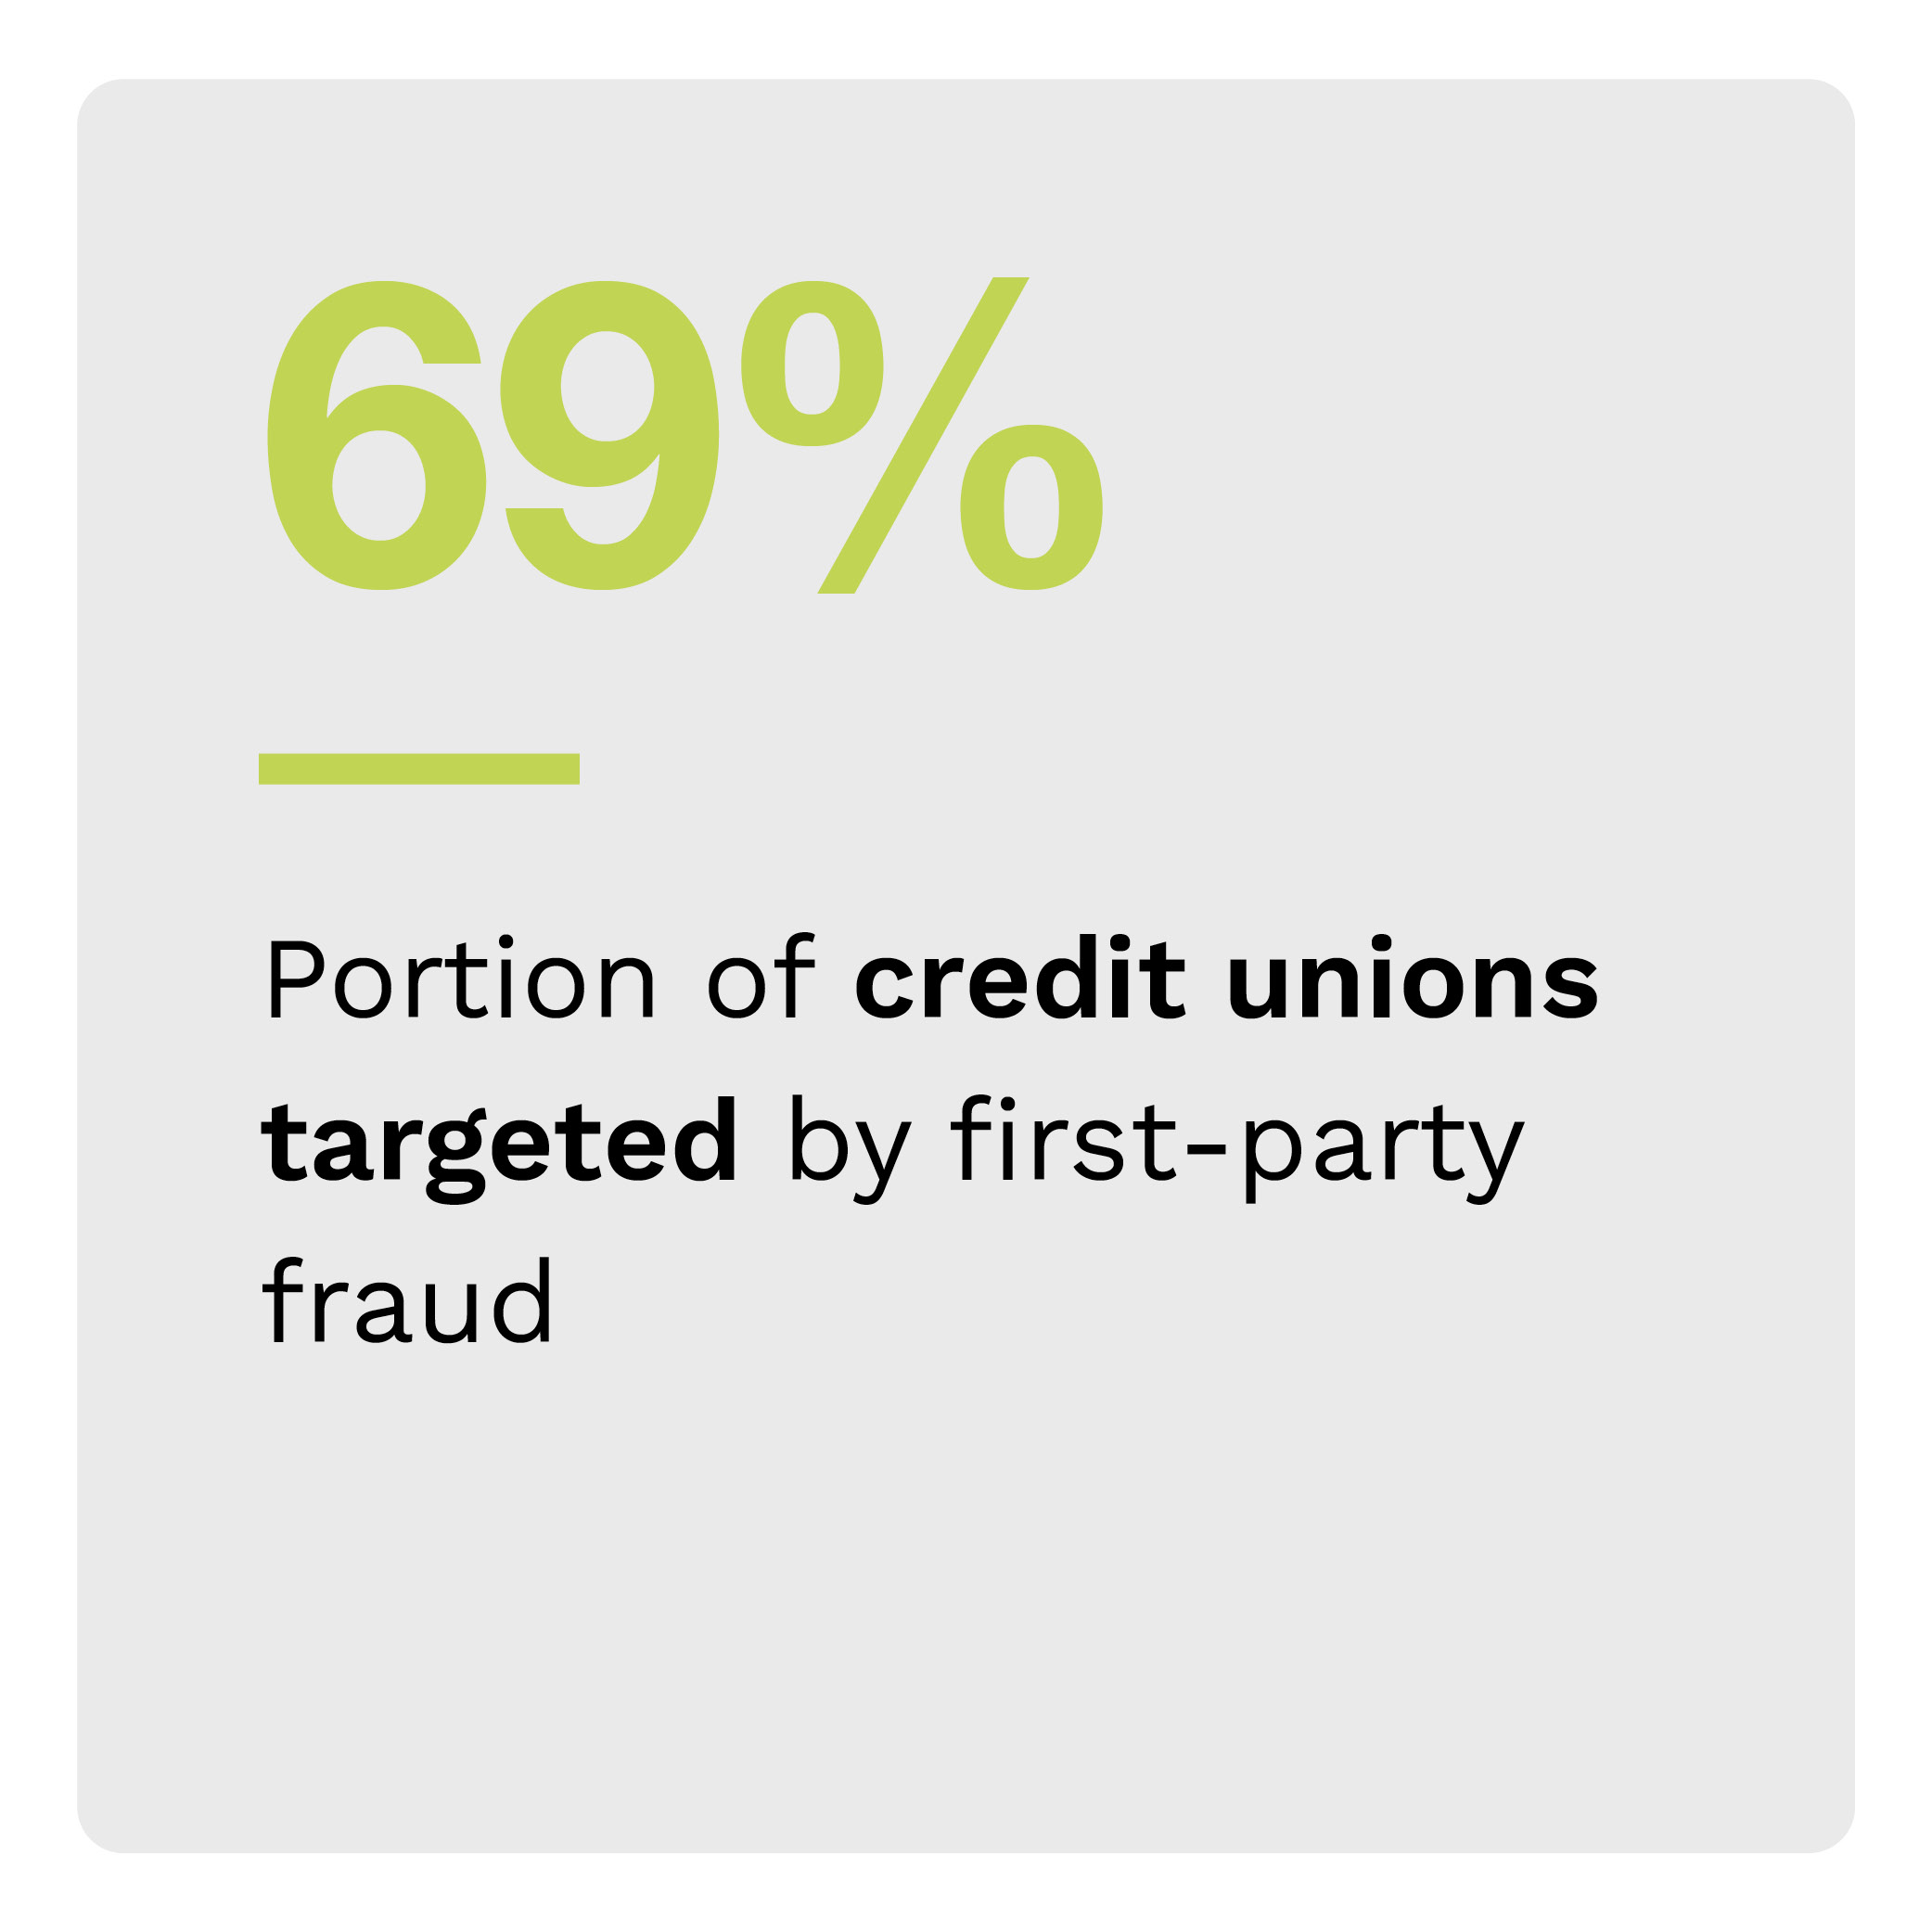 69%: Portion of credit unions targeted by first-party fraud